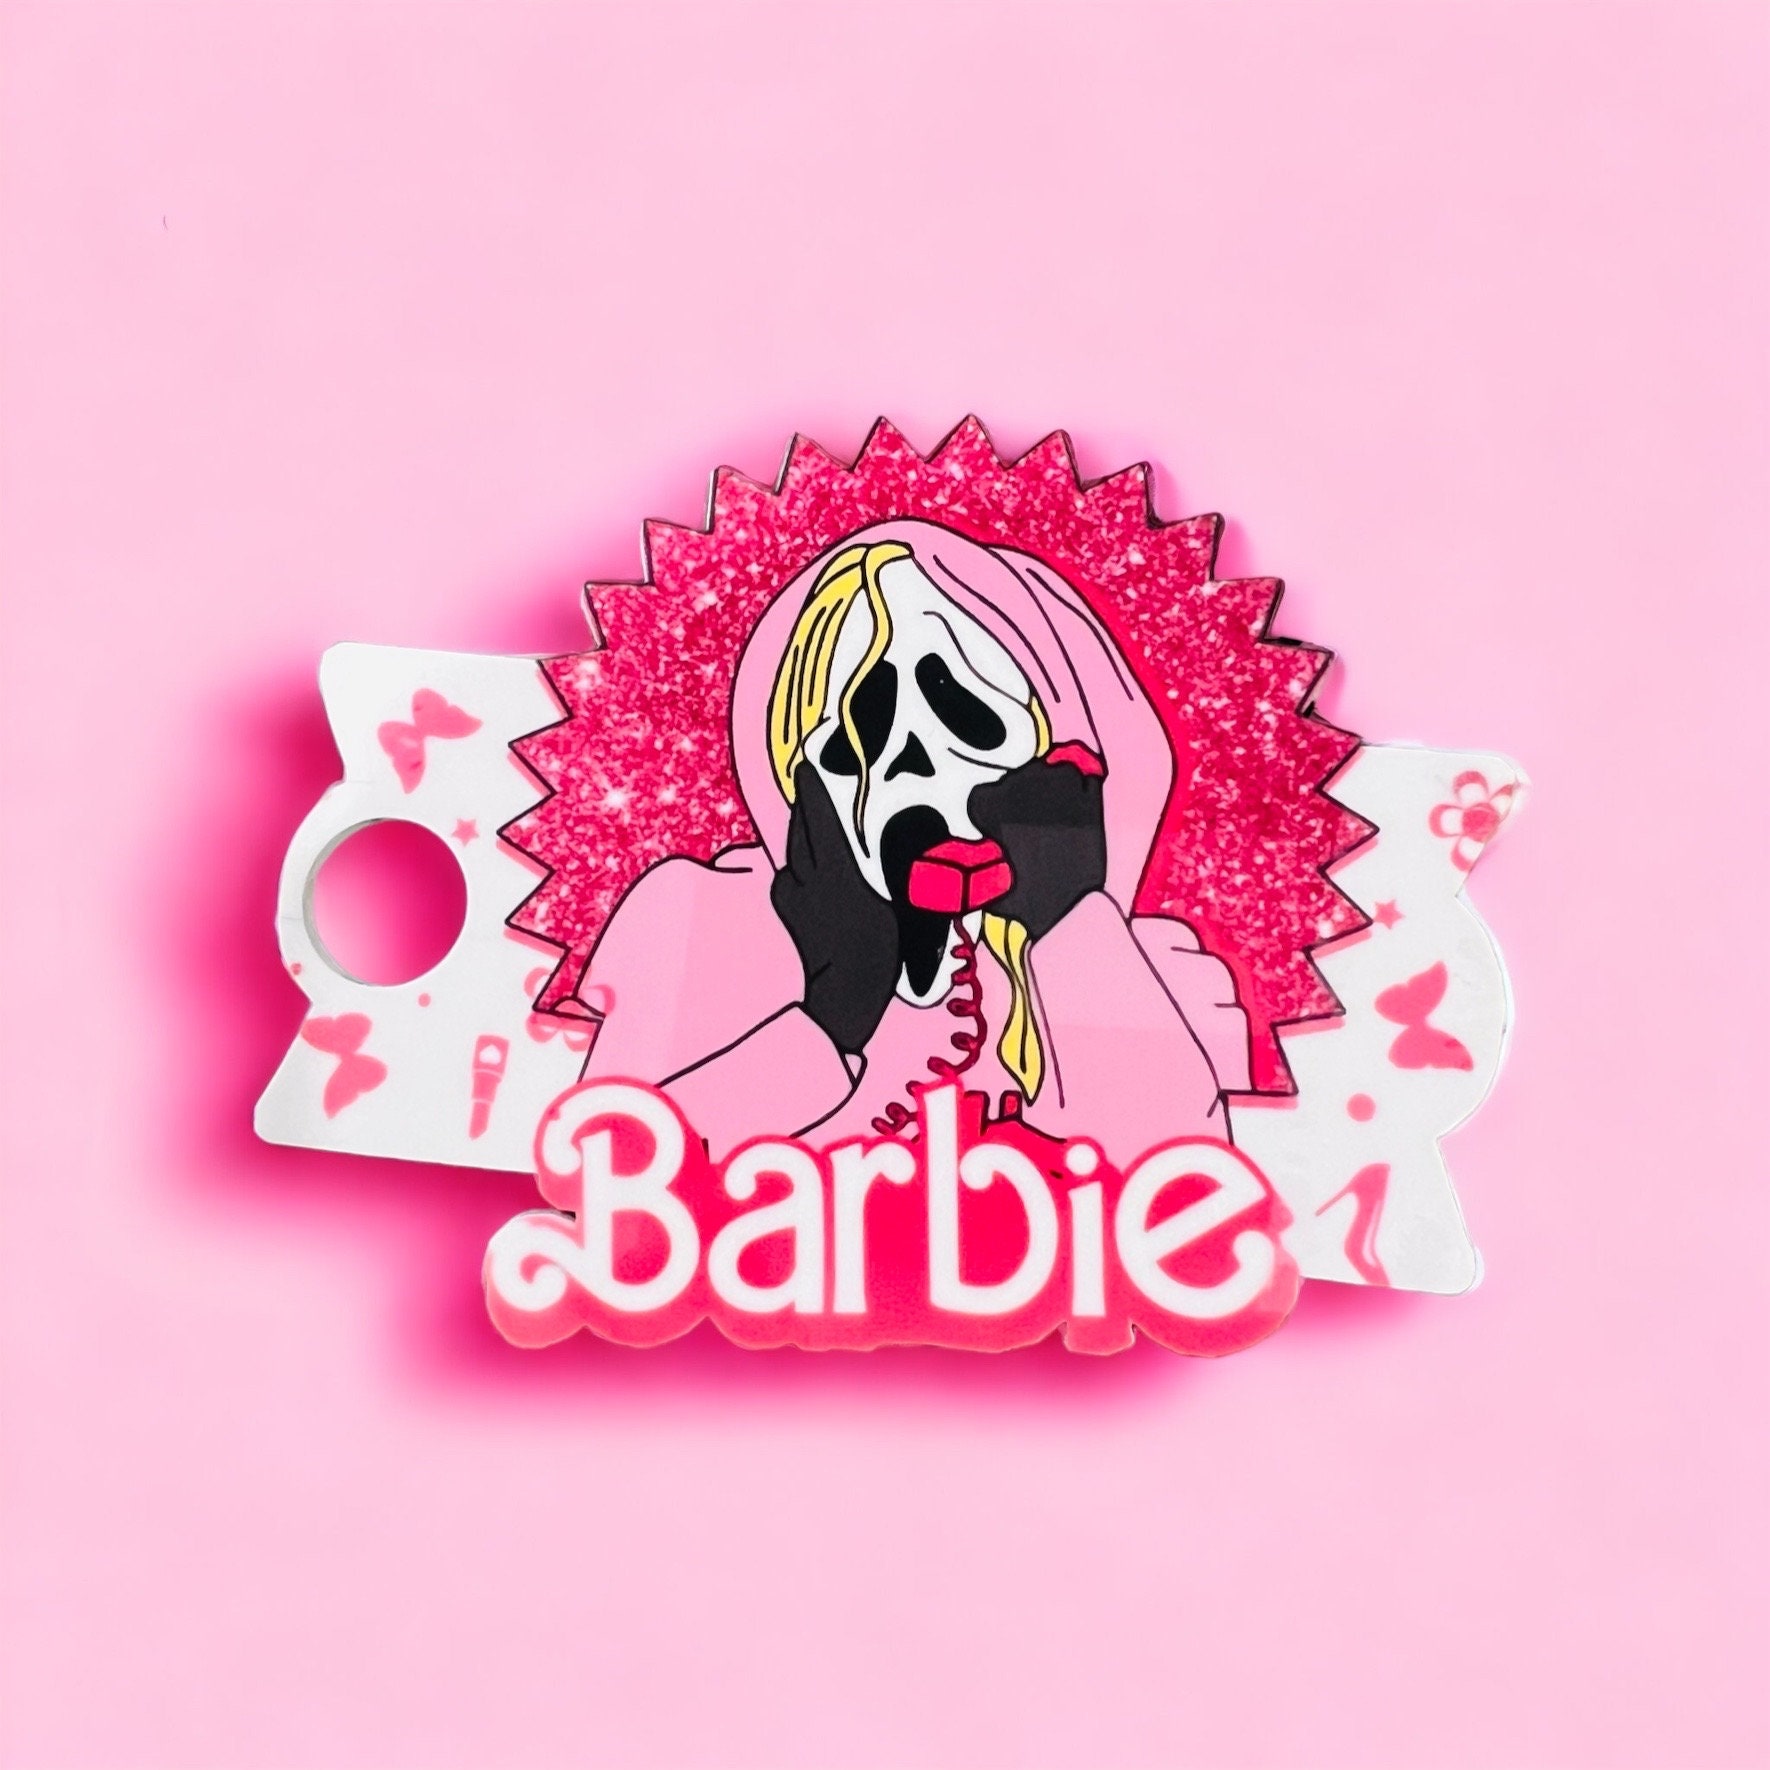 Watch how we make our #barbie pink Stanley Name Plates with optional P, stanley name plate